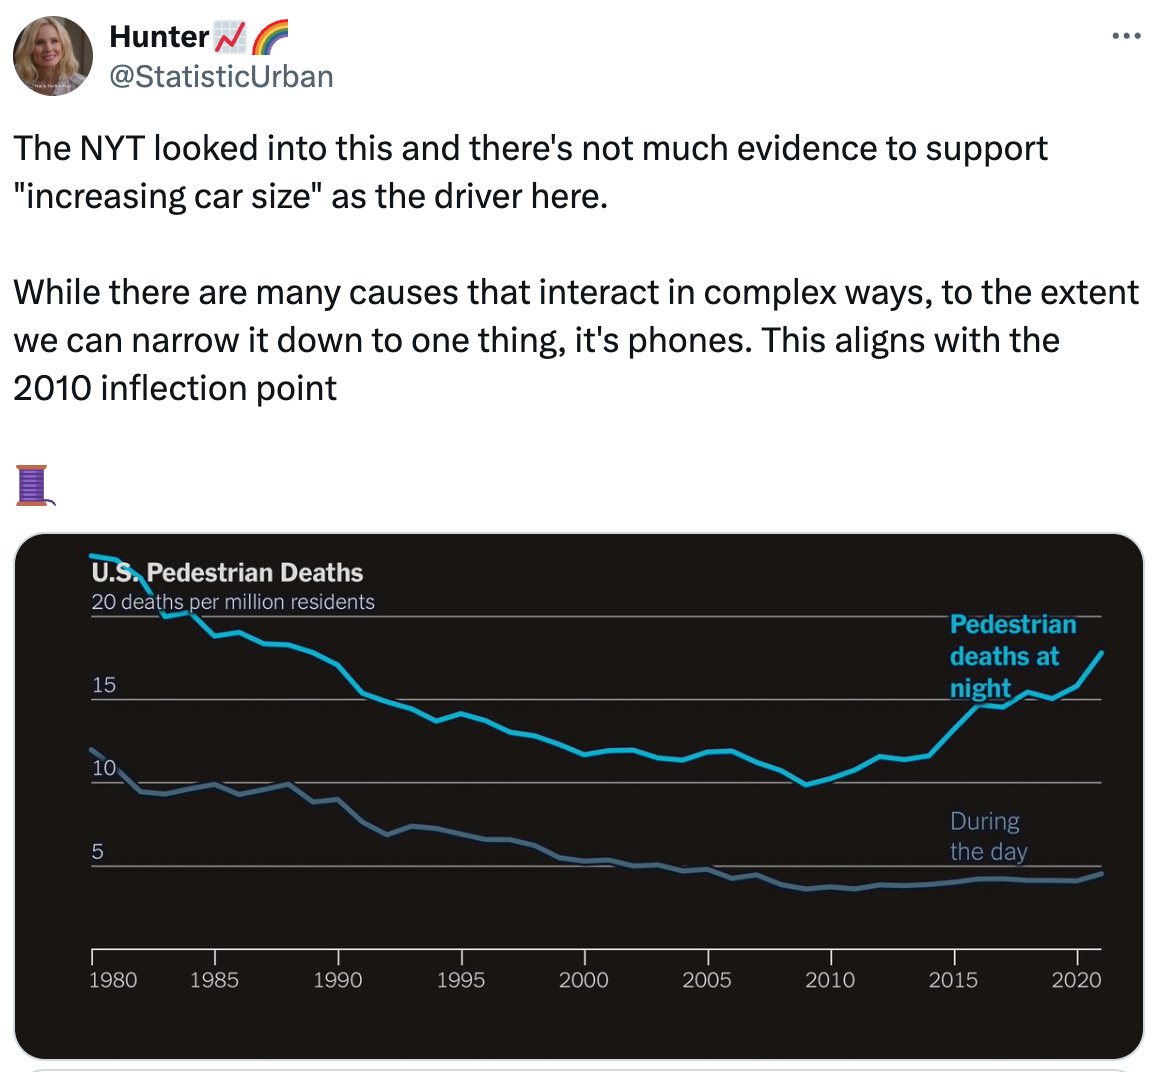  See new posts Conversation Hunter📈🌈 @StatisticUrban The NYT looked into this and there's not much evidence to support "increasing car size" as the driver here.  While there are many causes that interact in complex ways, to the extent we can narrow it down to one thing, it's phones. This aligns with the 2010 inflection point  🧵 Quote sam @sam_d_1995 ·